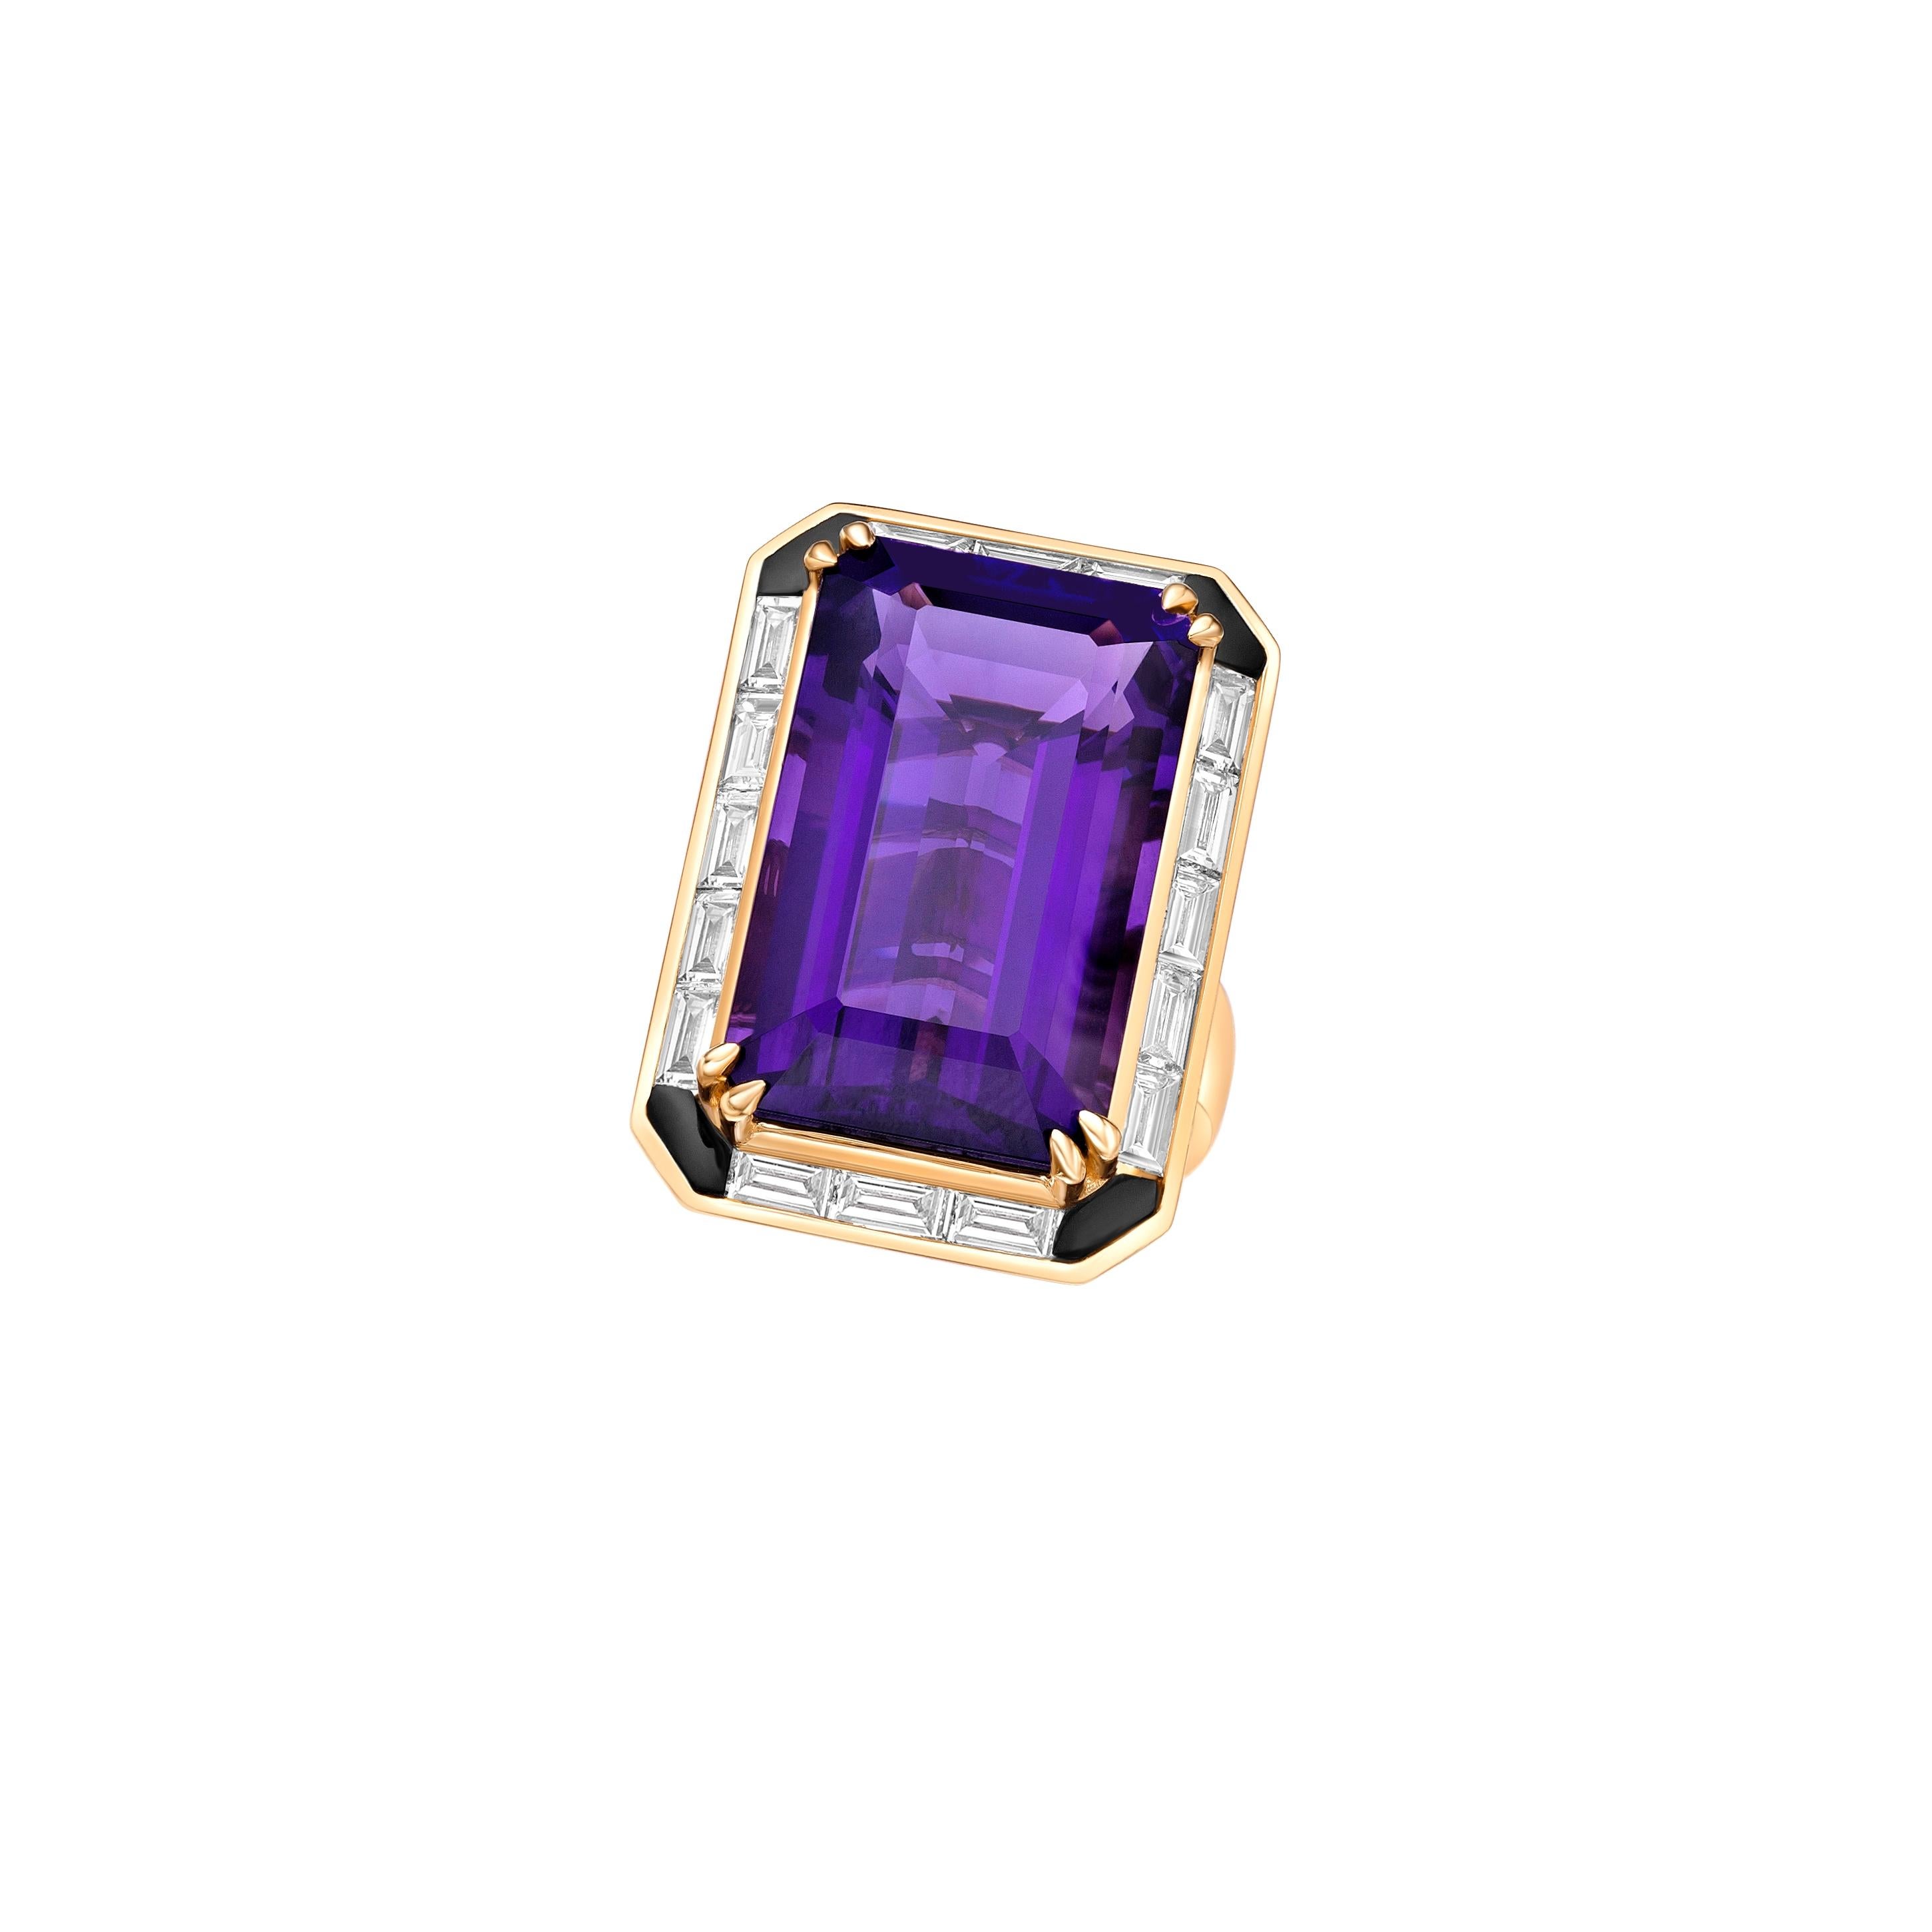 Octagon Cut 23.62 Carat Amethyst Fancy Ring in 18KYG with Black Onyx and White Diamond.   For Sale